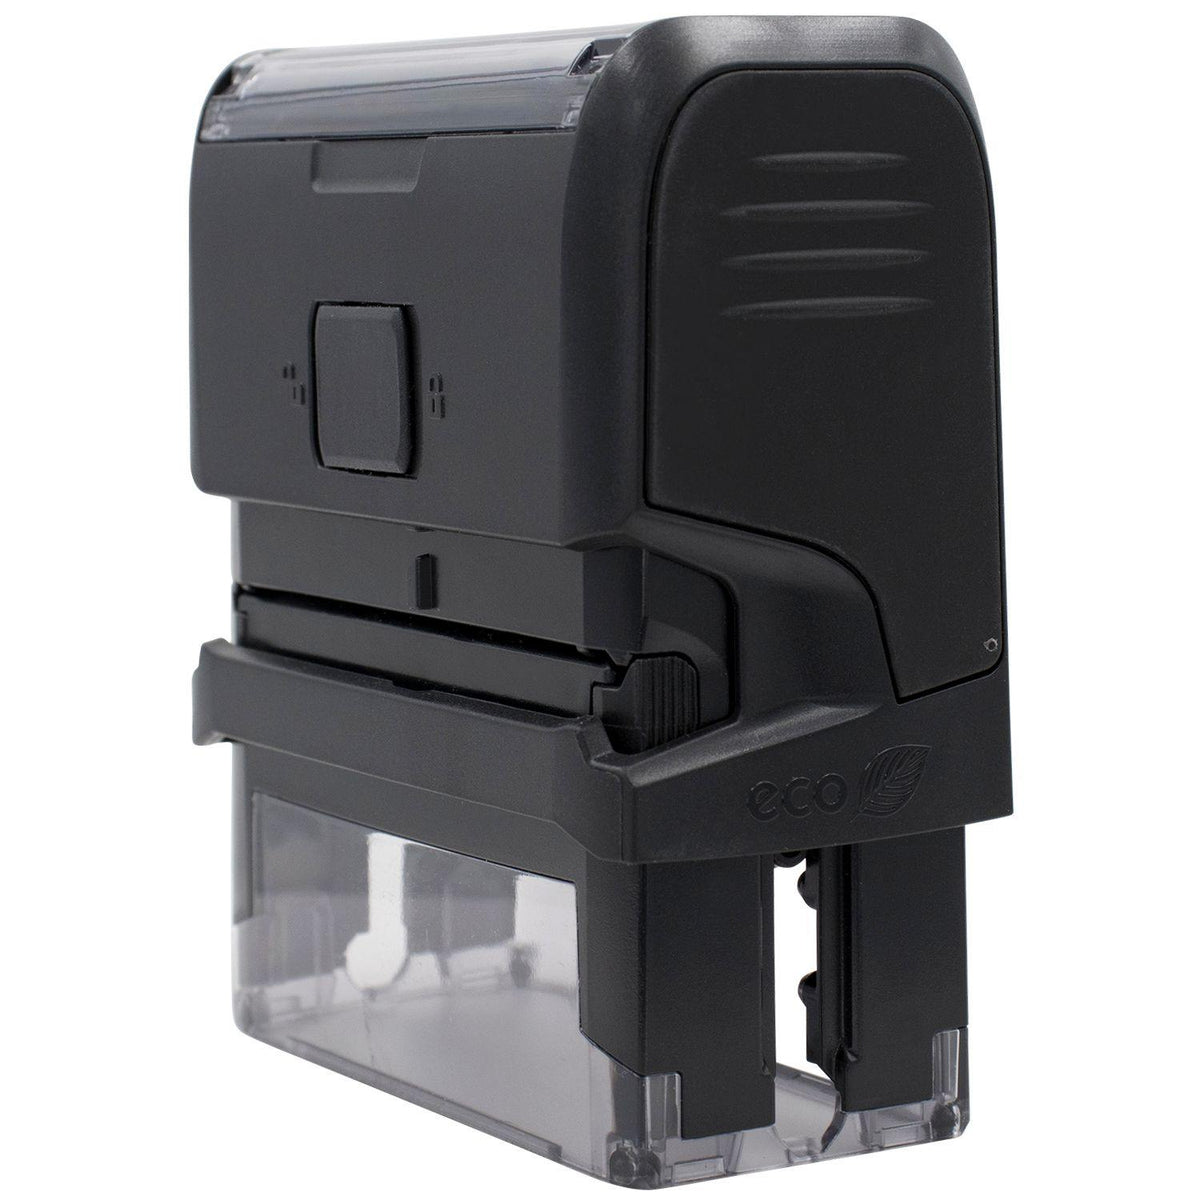 Side View of Large Self-Inking Bold Priority Stamp at an Angle